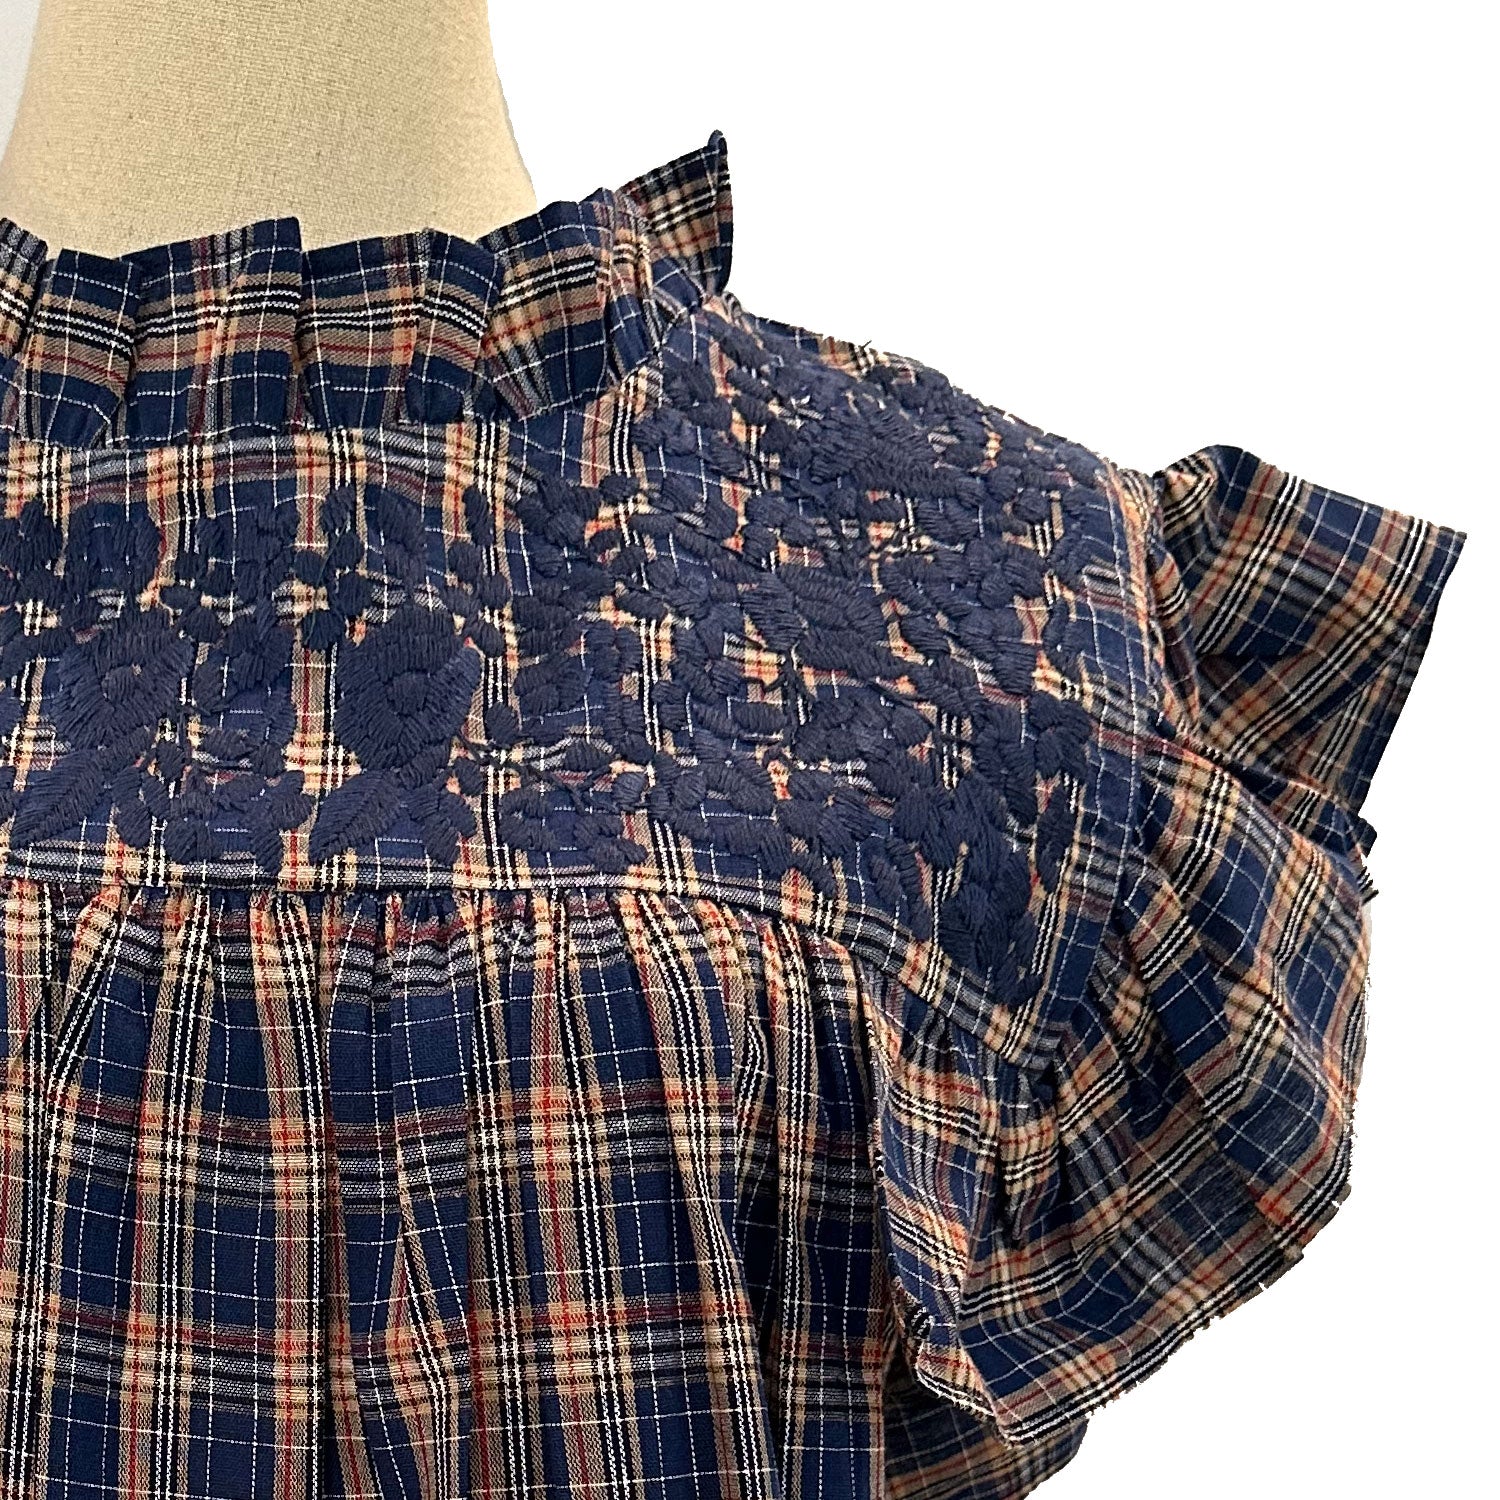 Navy Plaid Extra Blouse (XS, S only)